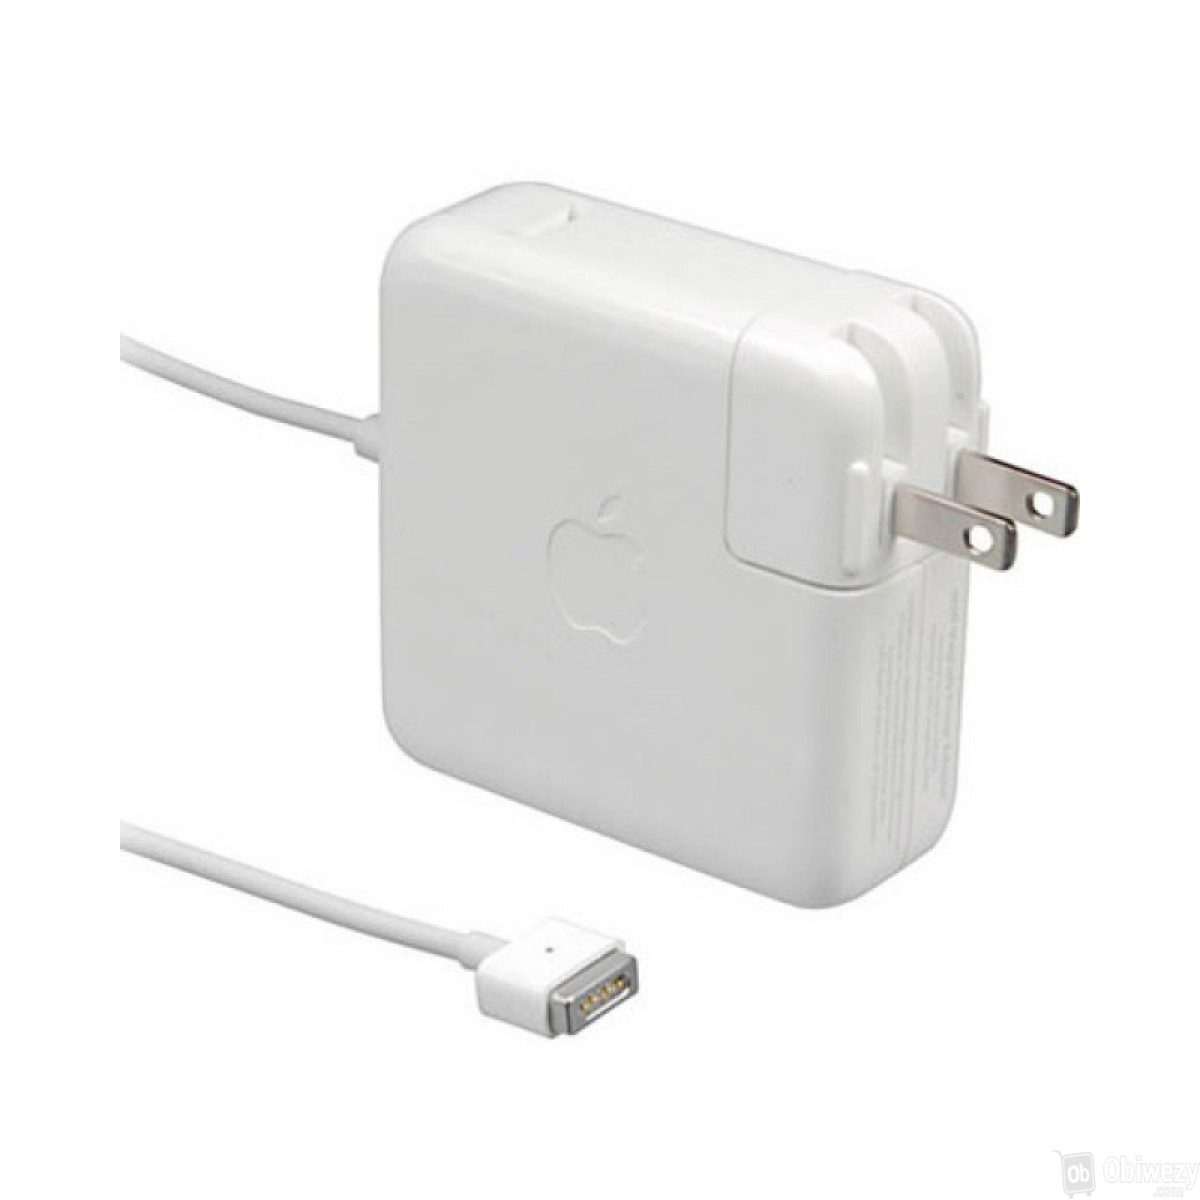 apple 60w magsafe 2 power adapter 1 800x640 1